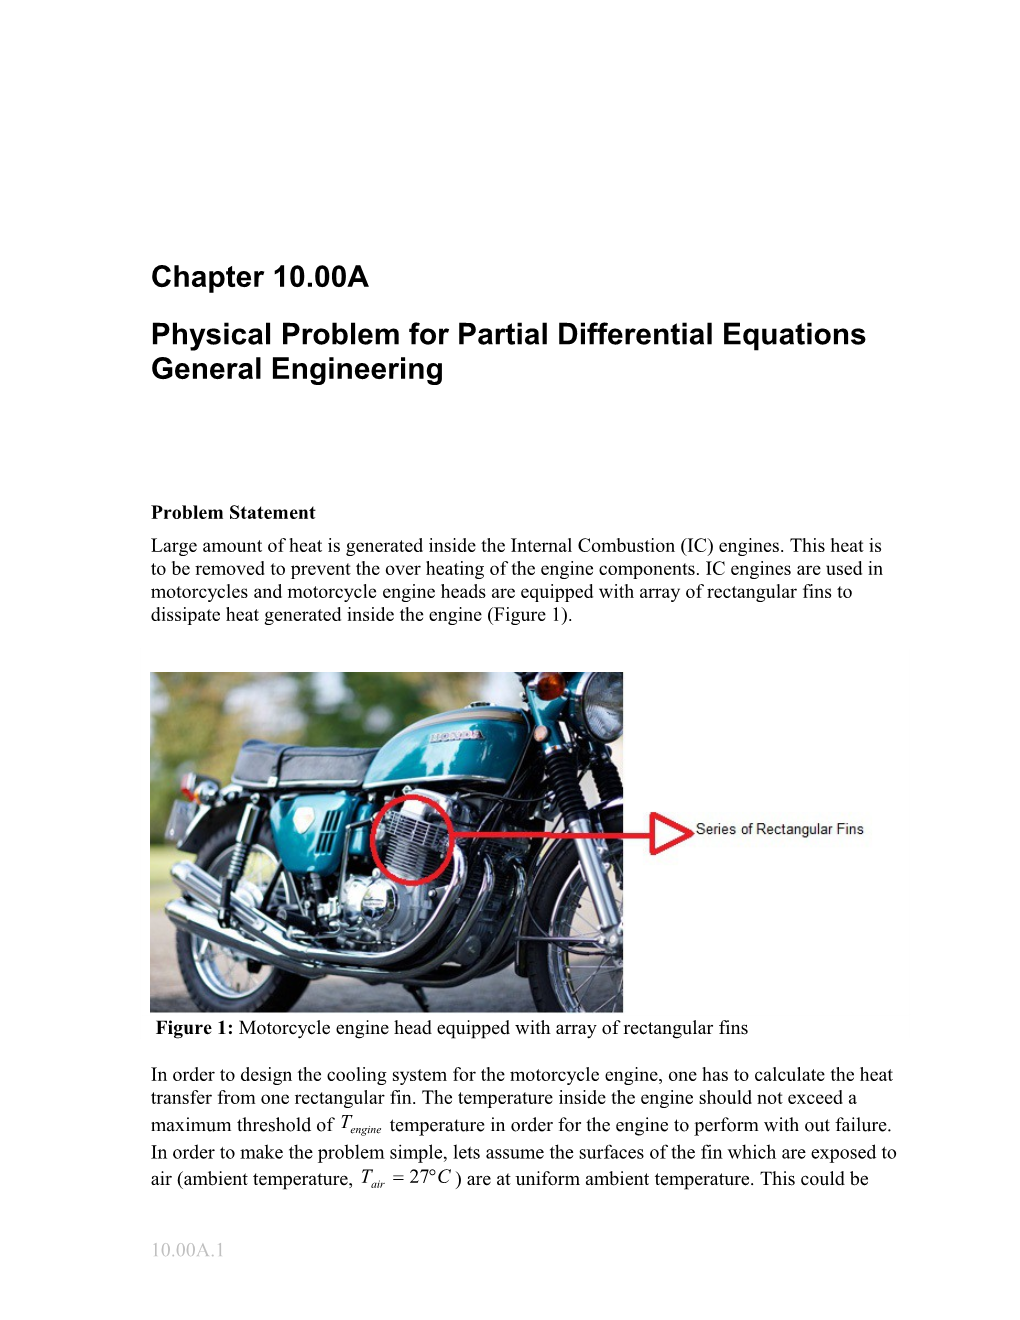 Physical Problem for Nonlinear Equations:General Engineering